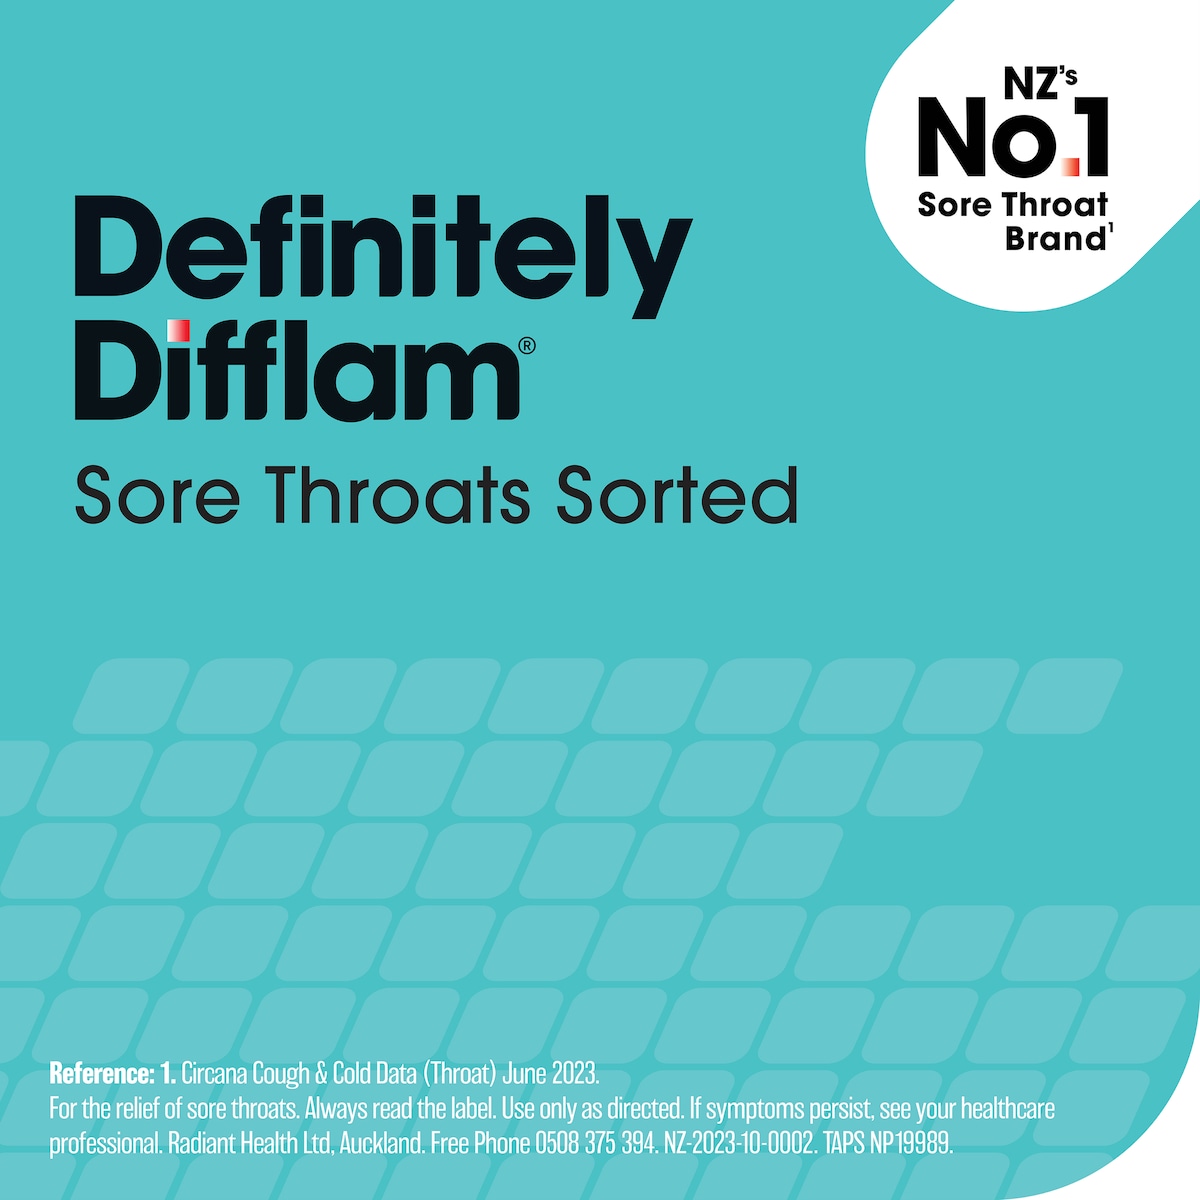 Difflam Ready To Use Sore Throat Gargle With Iodine Fresh Mint 200Ml